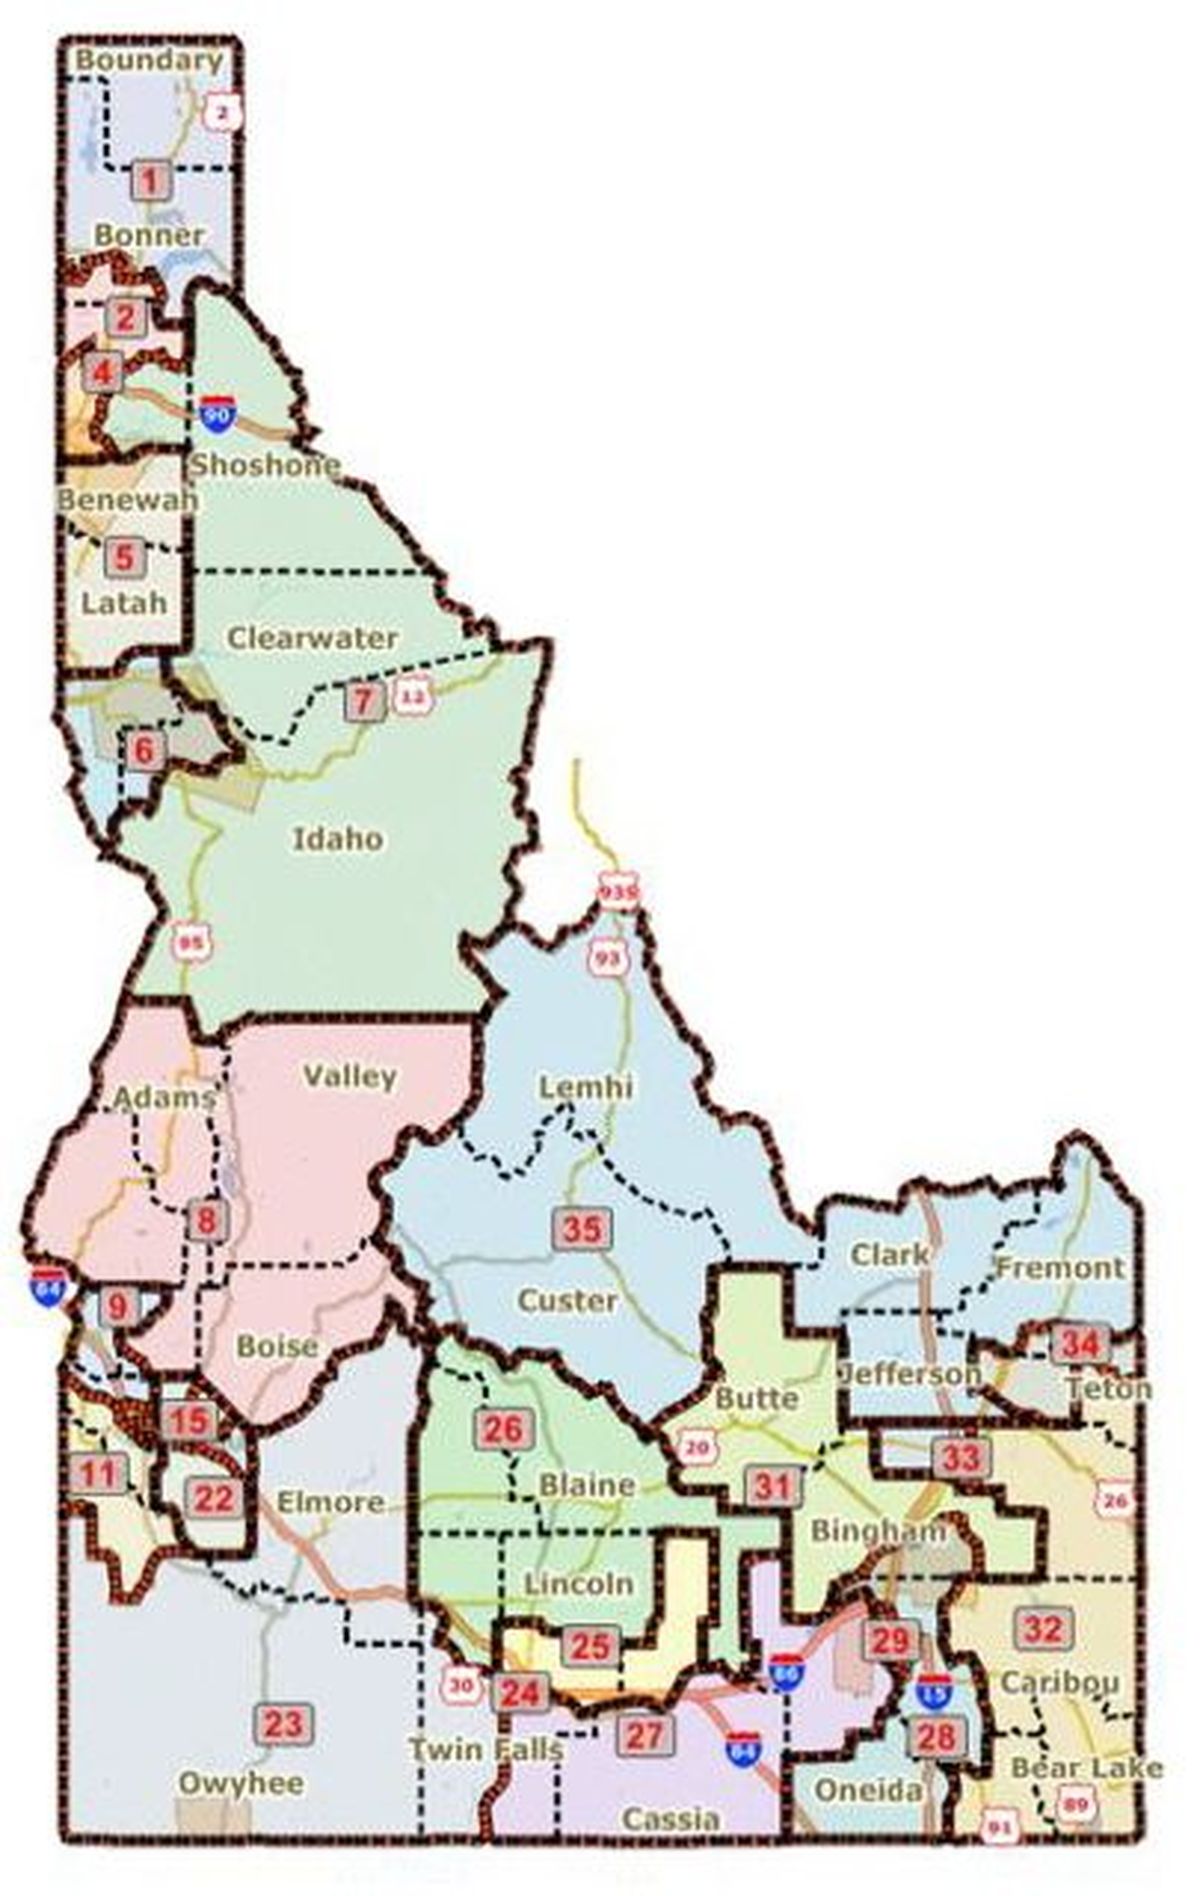 Kootenai County decides to sue over redistricting The SpokesmanReview